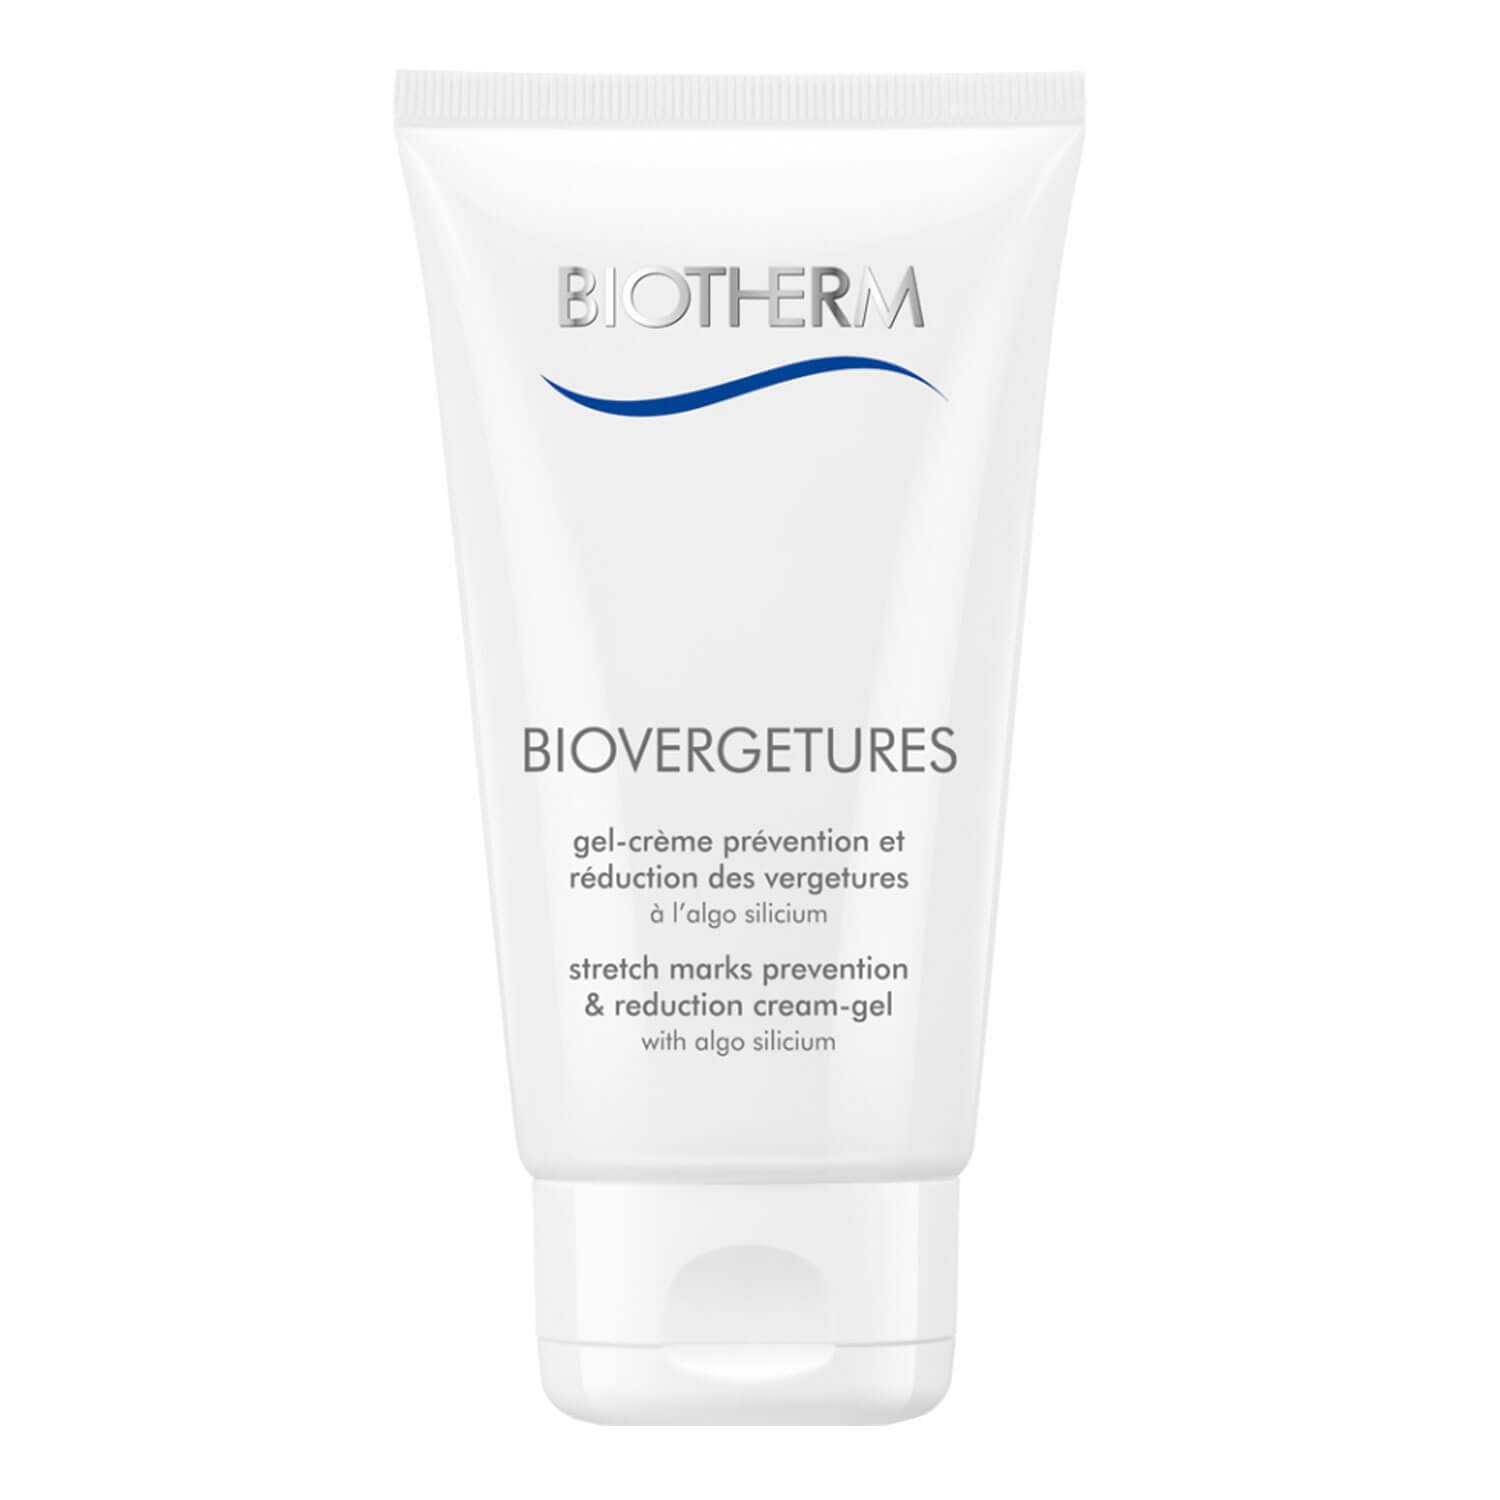 Product image from Biotherm Body - Biovertegures